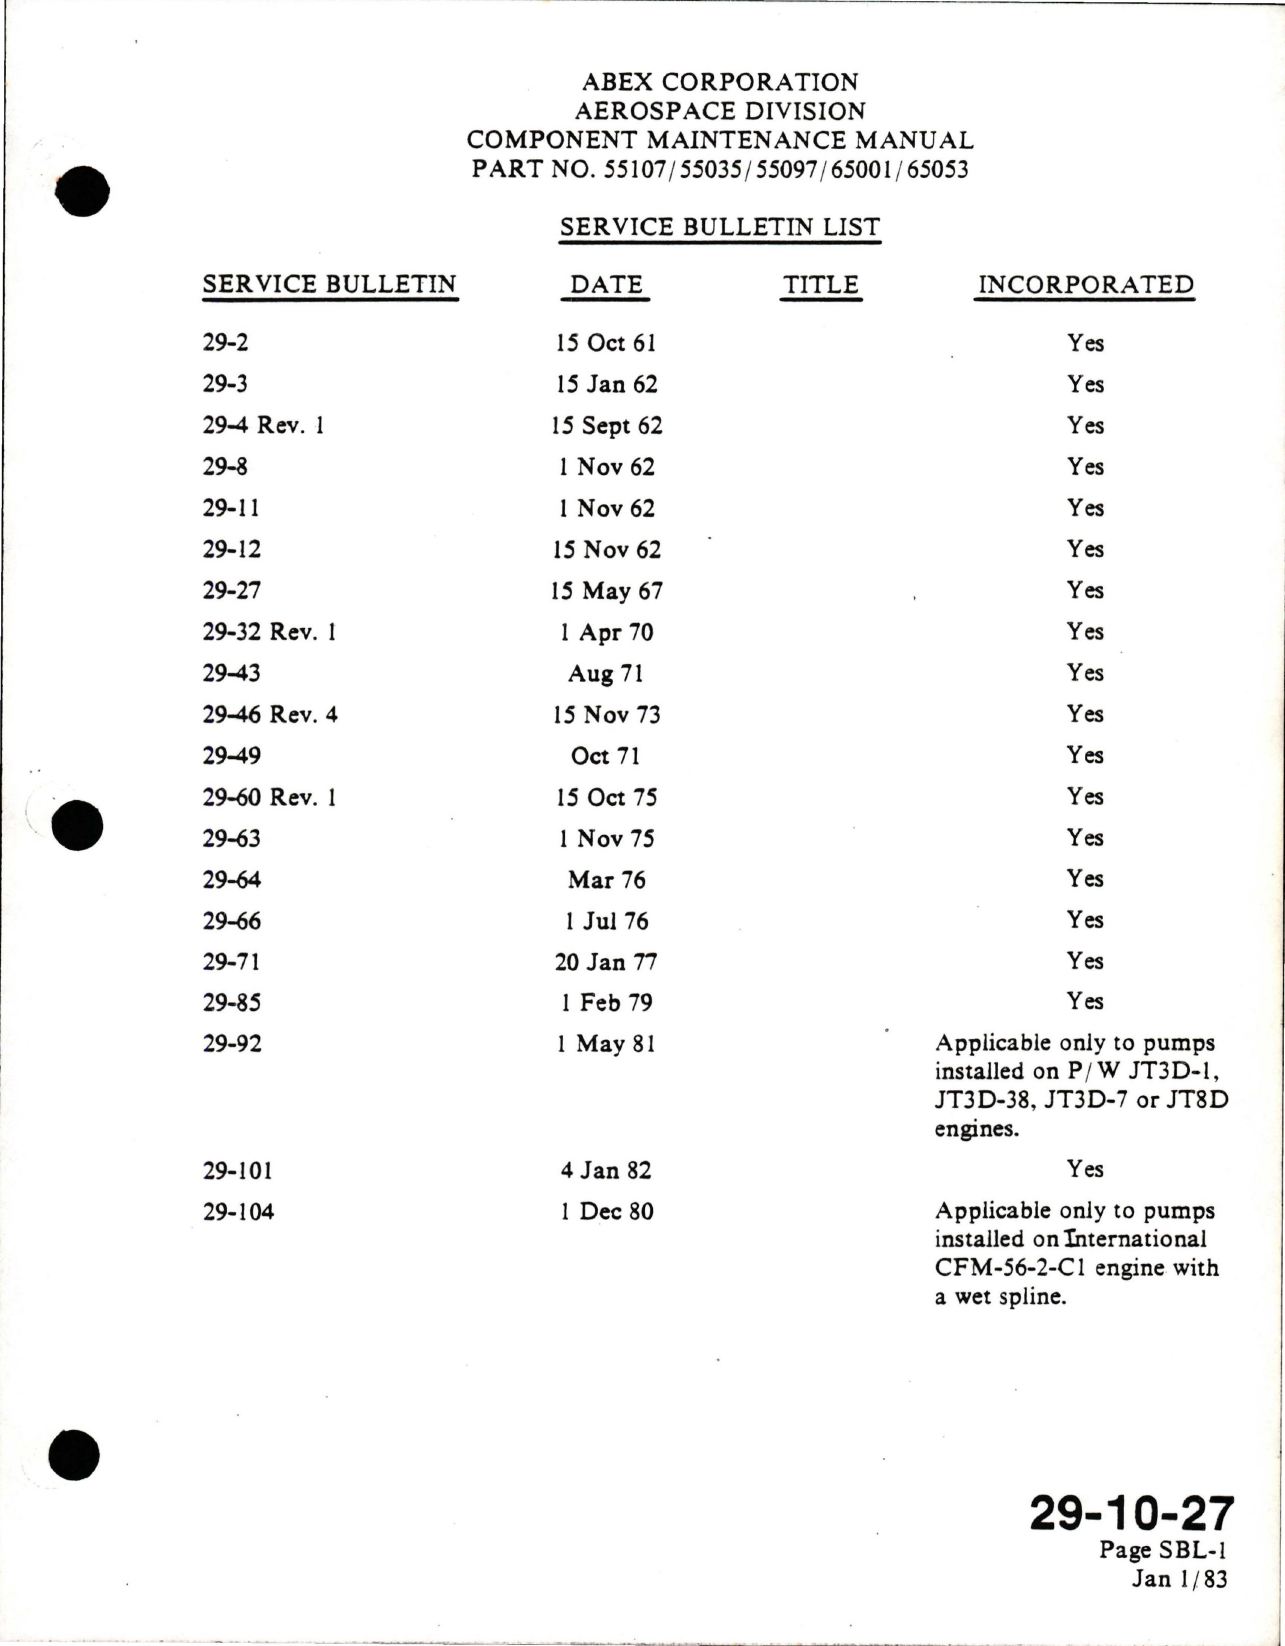 Sample page 7 from AirCorps Library document: Maintenance Manual with Illustrated Parts List for Variable Delivery Hydraulic Pump